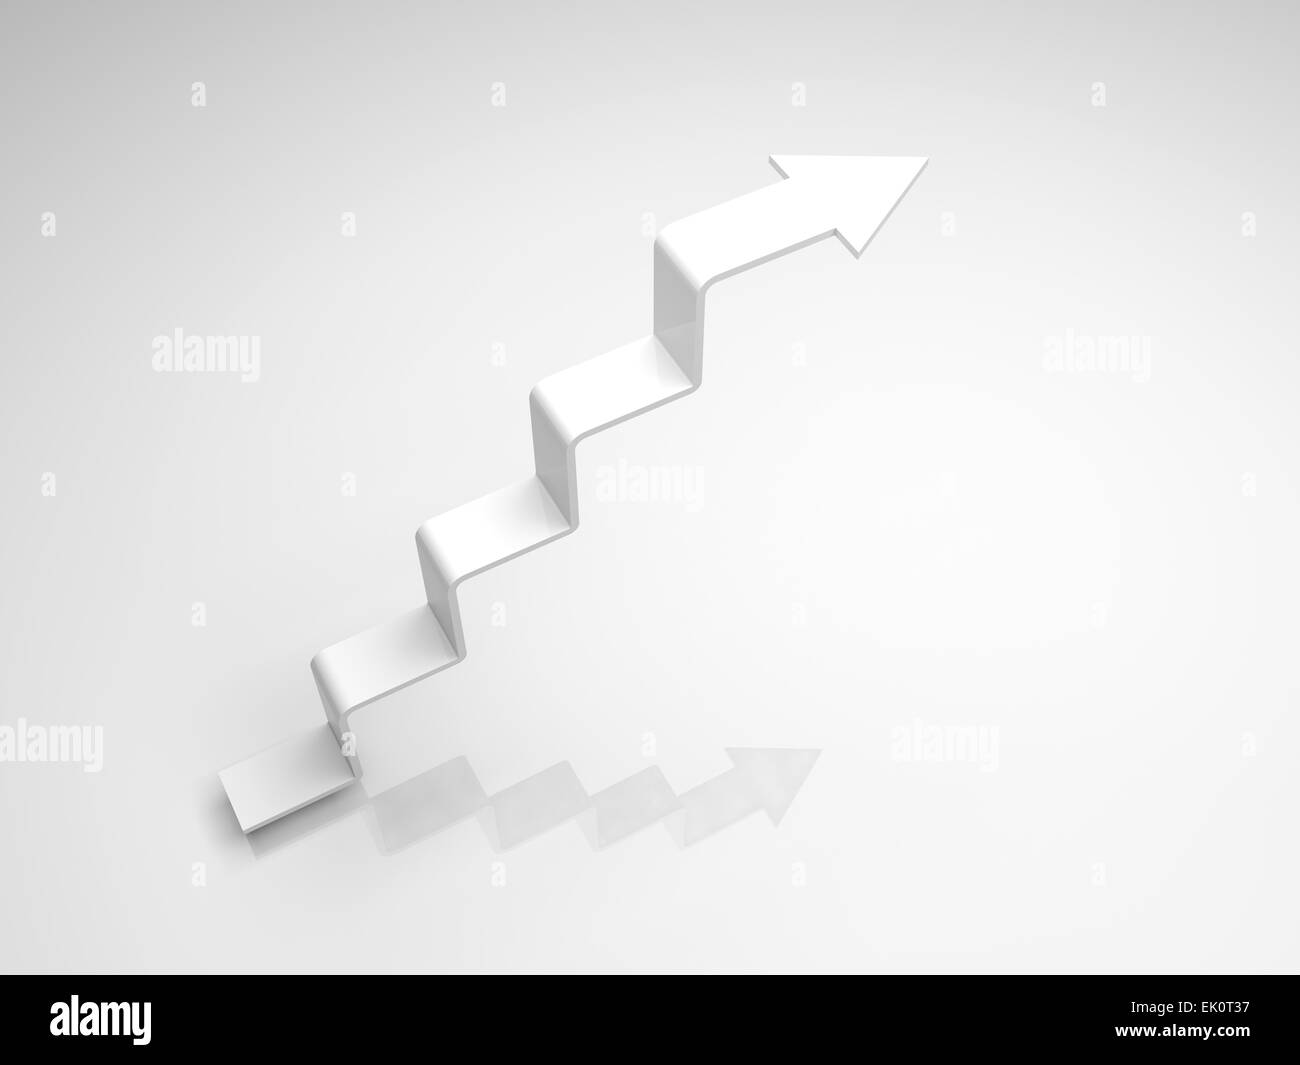 White arrow in shape of stairway going up, 3d illustration Stock Photo